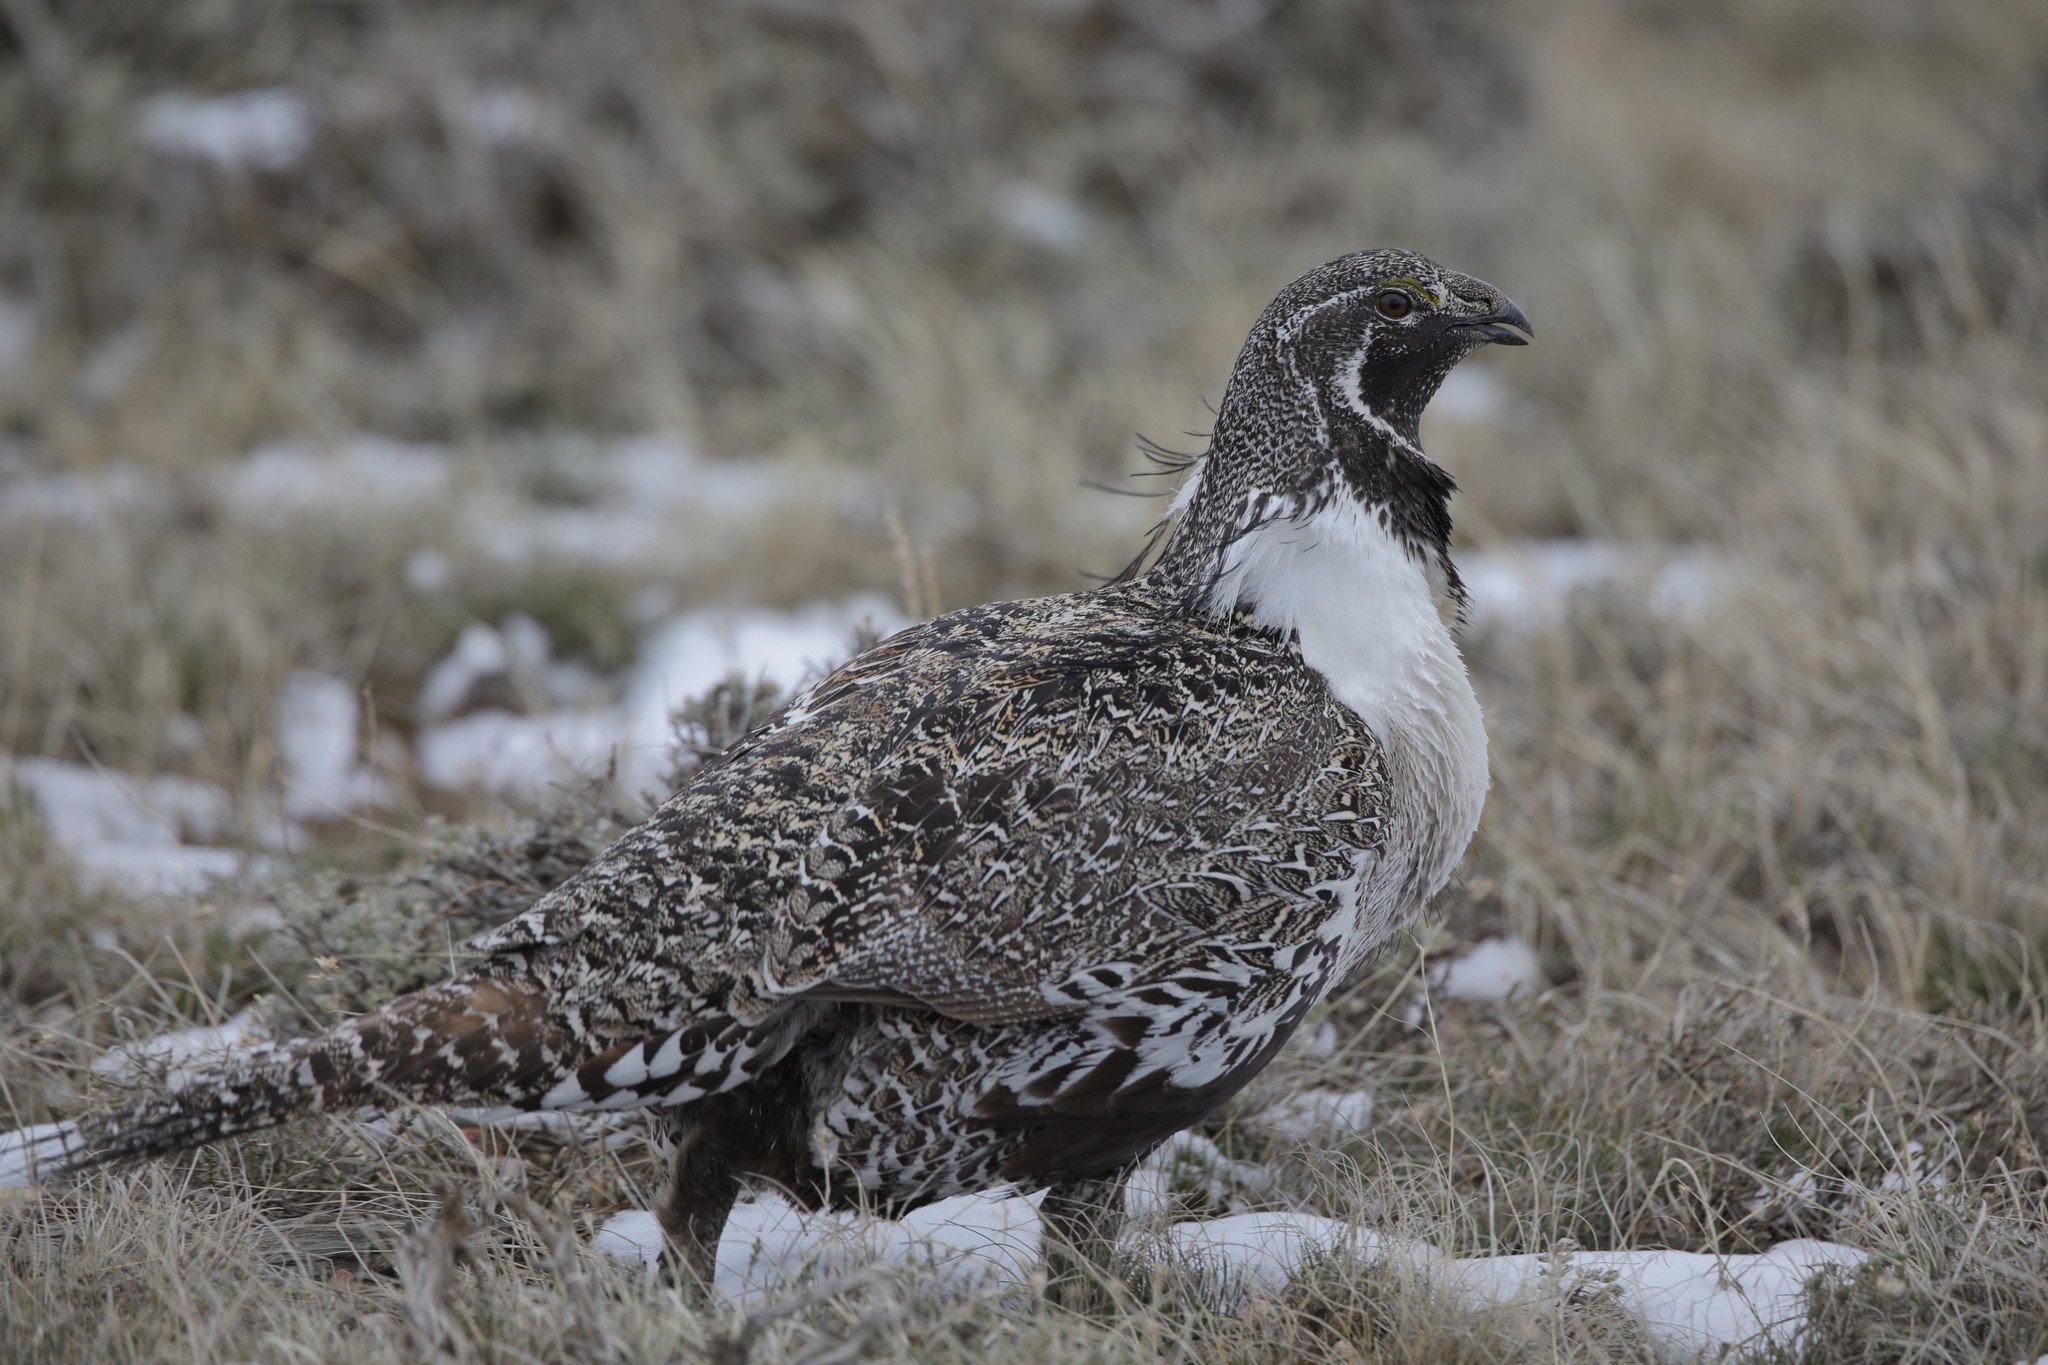 Greater sagegrouse